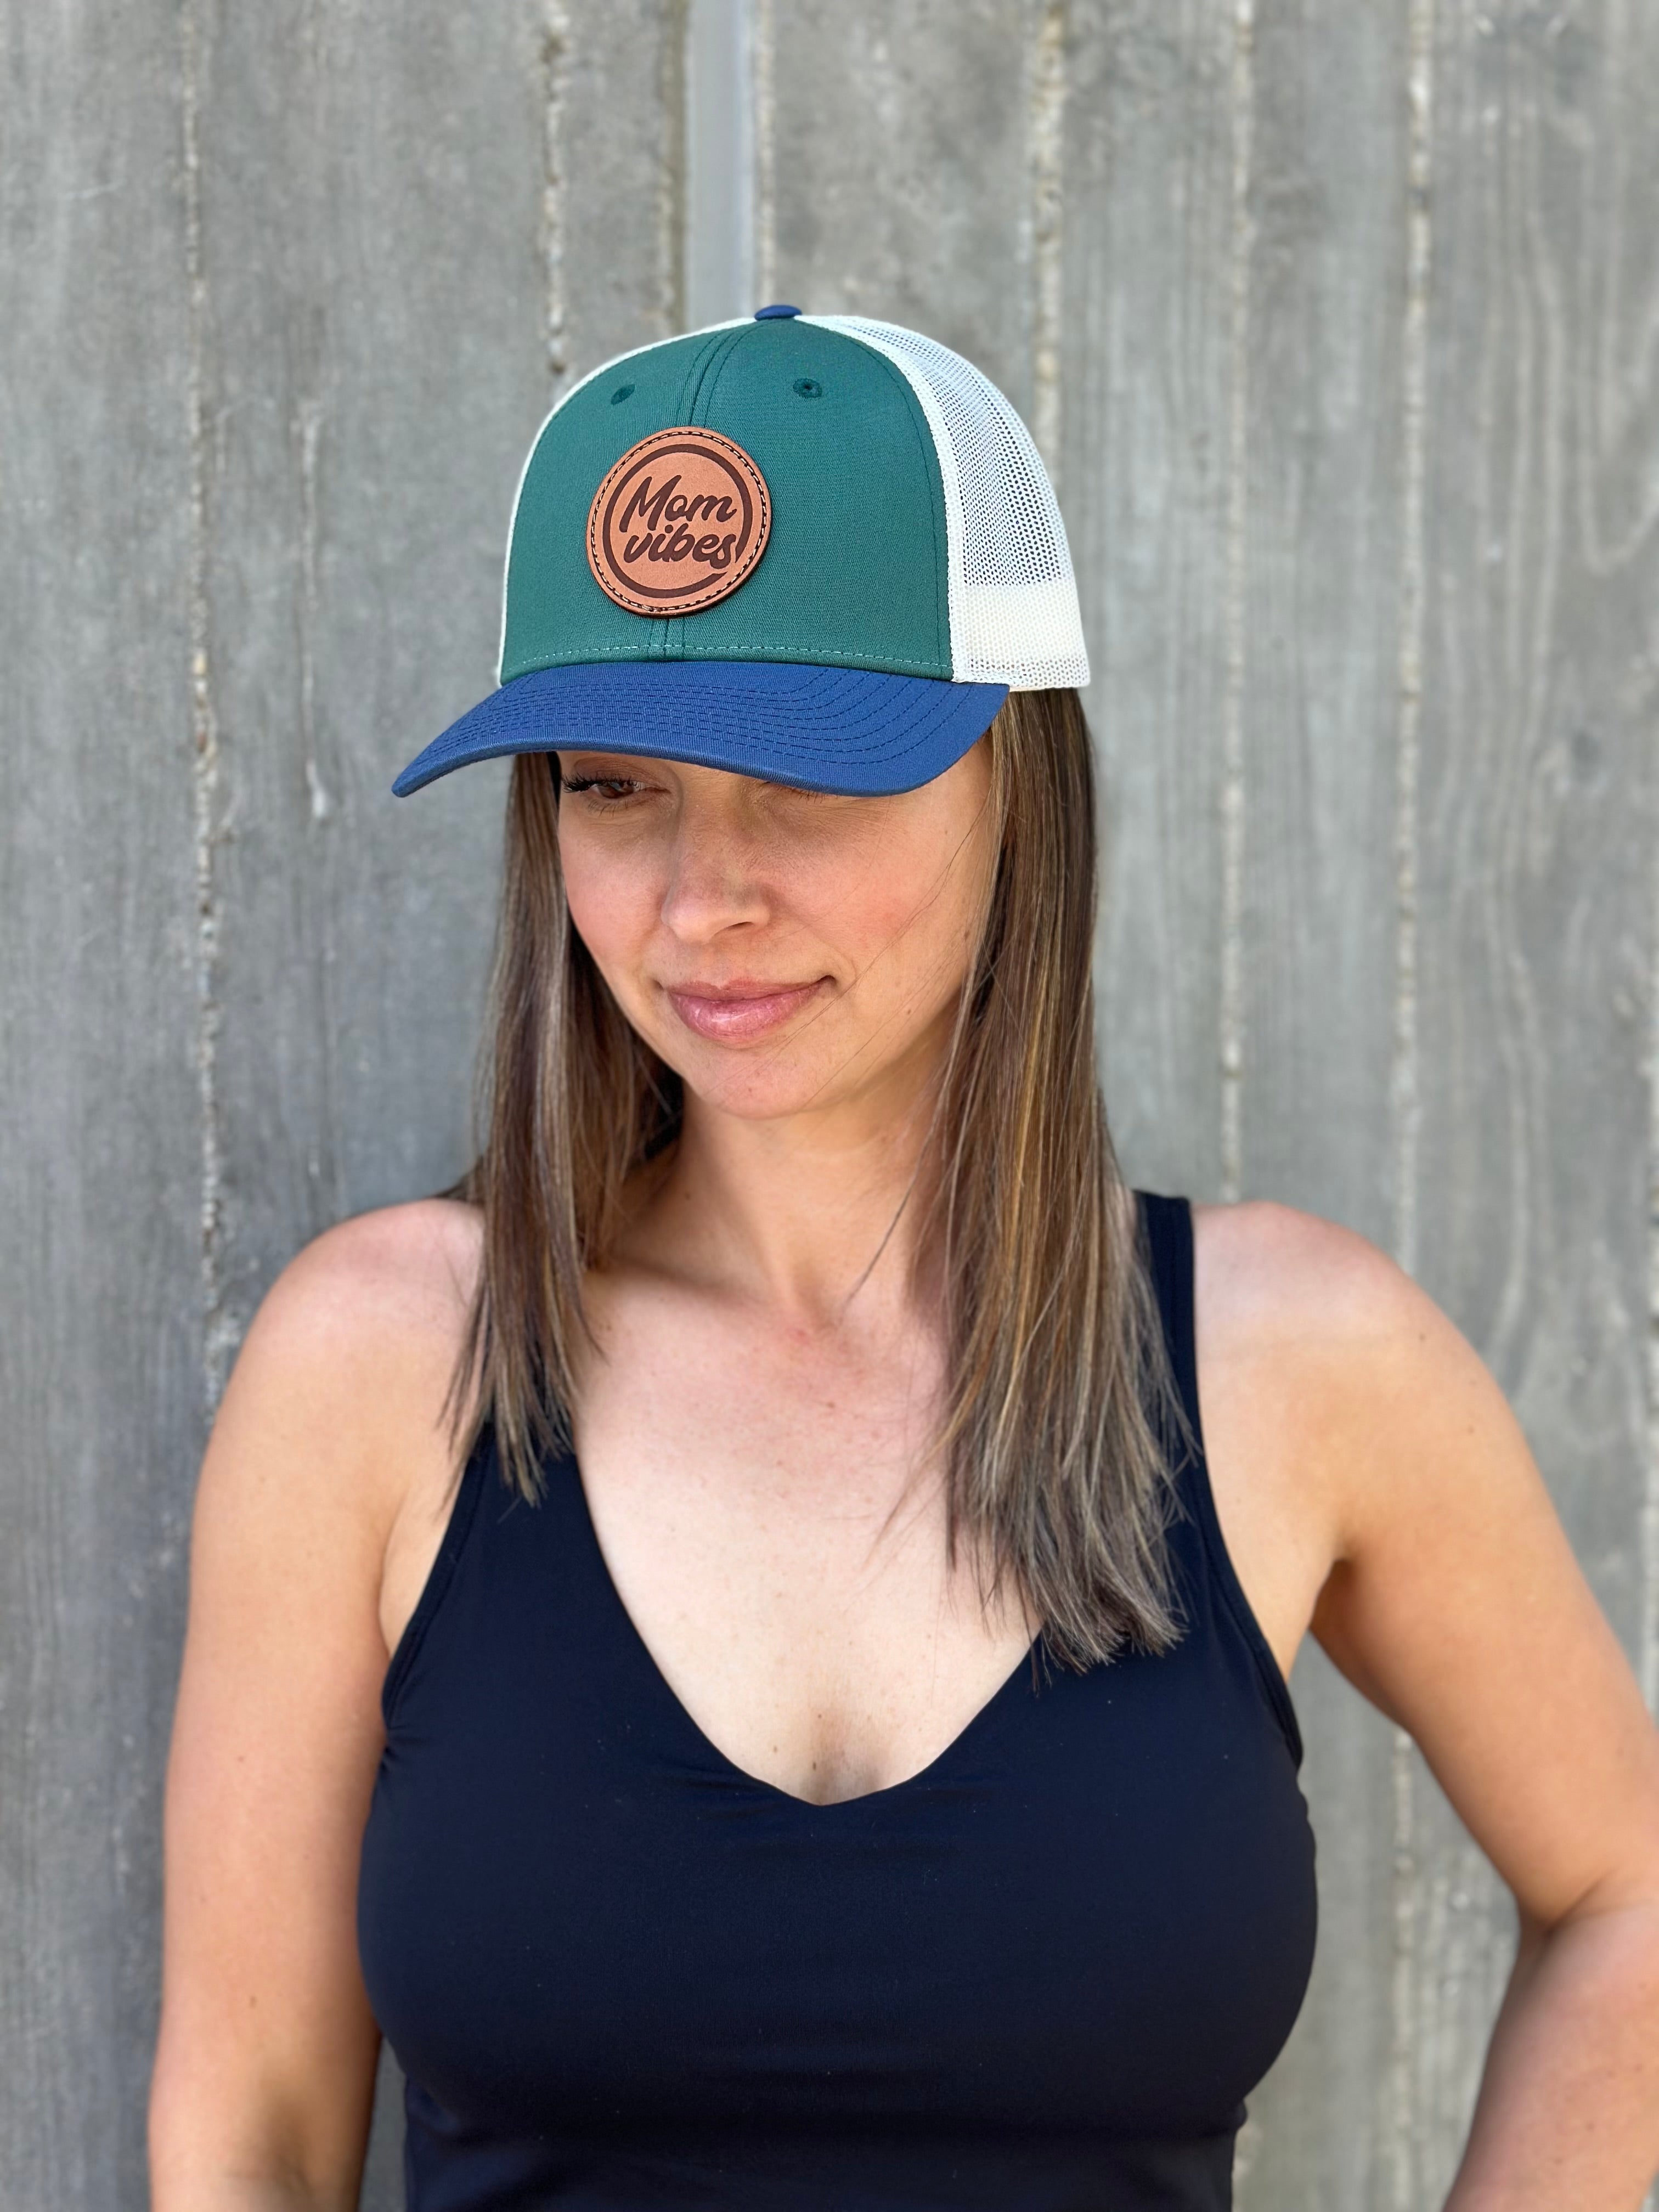 MomVibes Circle Patch - Curved Bill Trucker Snapback